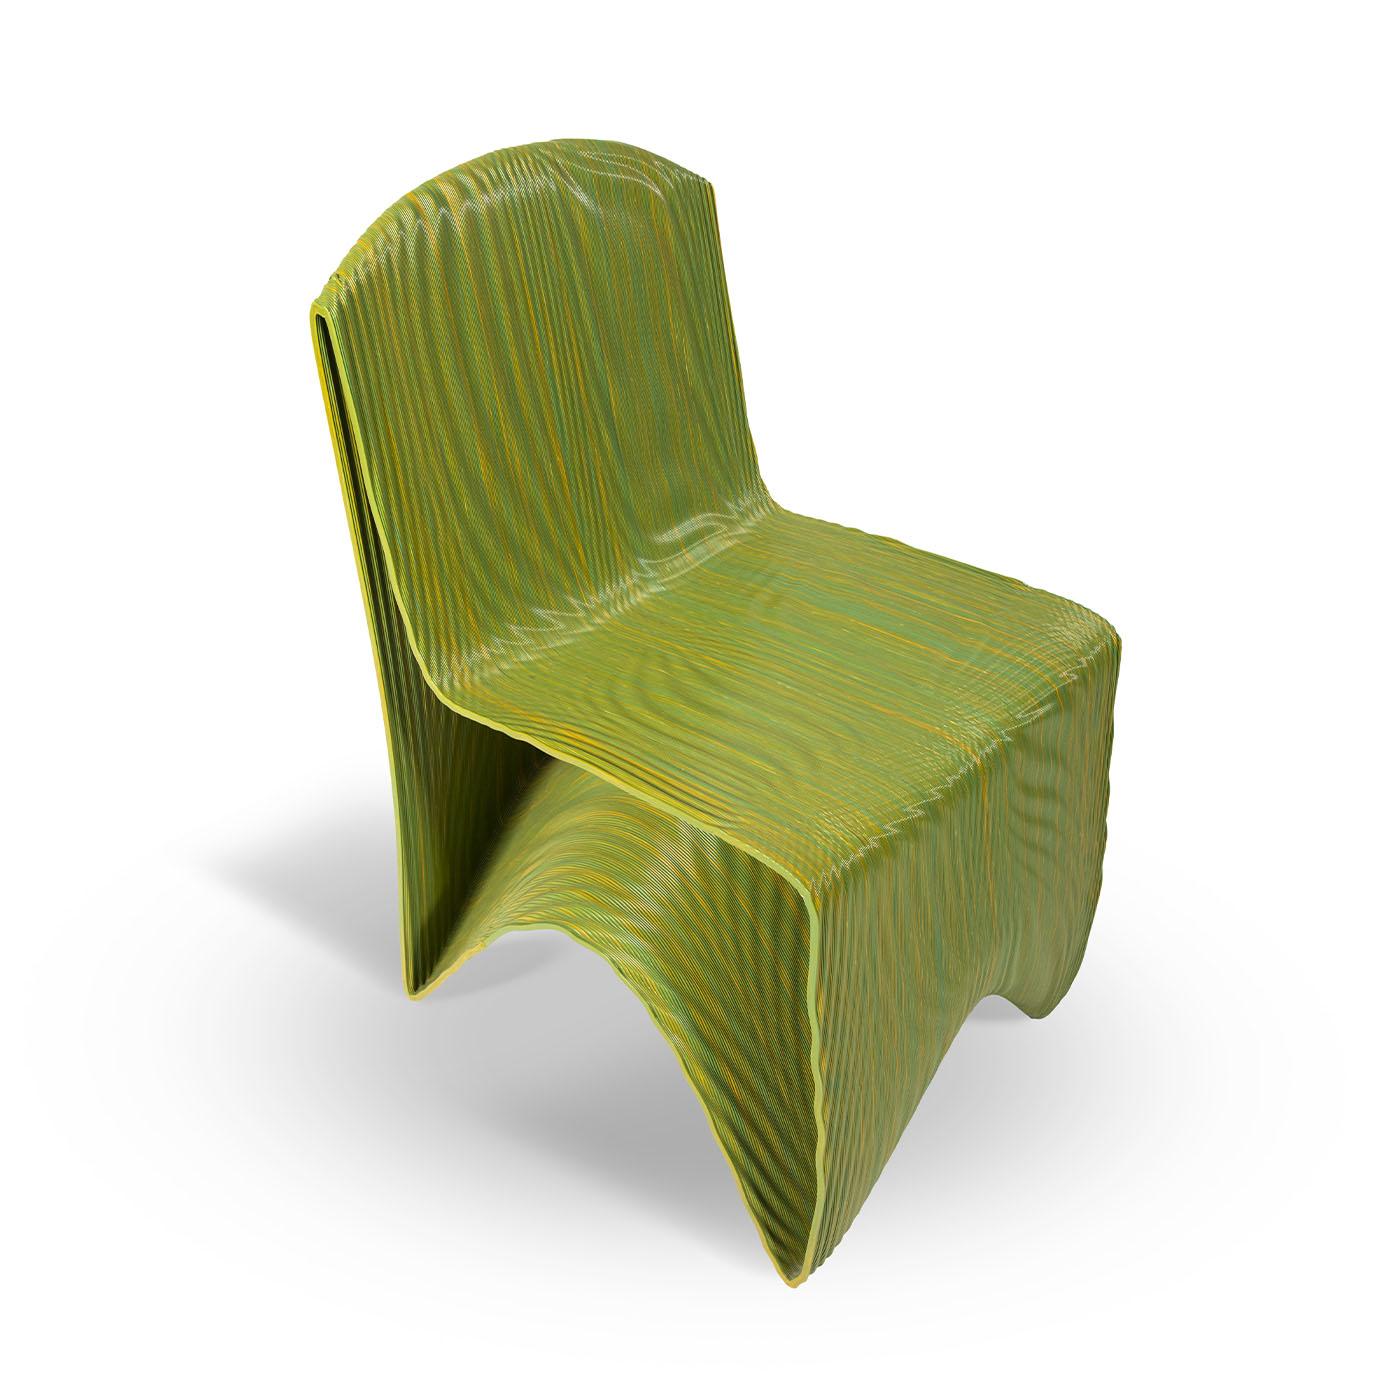 Introducing Santorini, a chair blending aesthetics and lightness, masterfully crafted by Medaarch in 2020. Its continuous material design provides seamless comfort. The 3D-printed PLA seat suits indoor and natural settings alike. Reflecting the